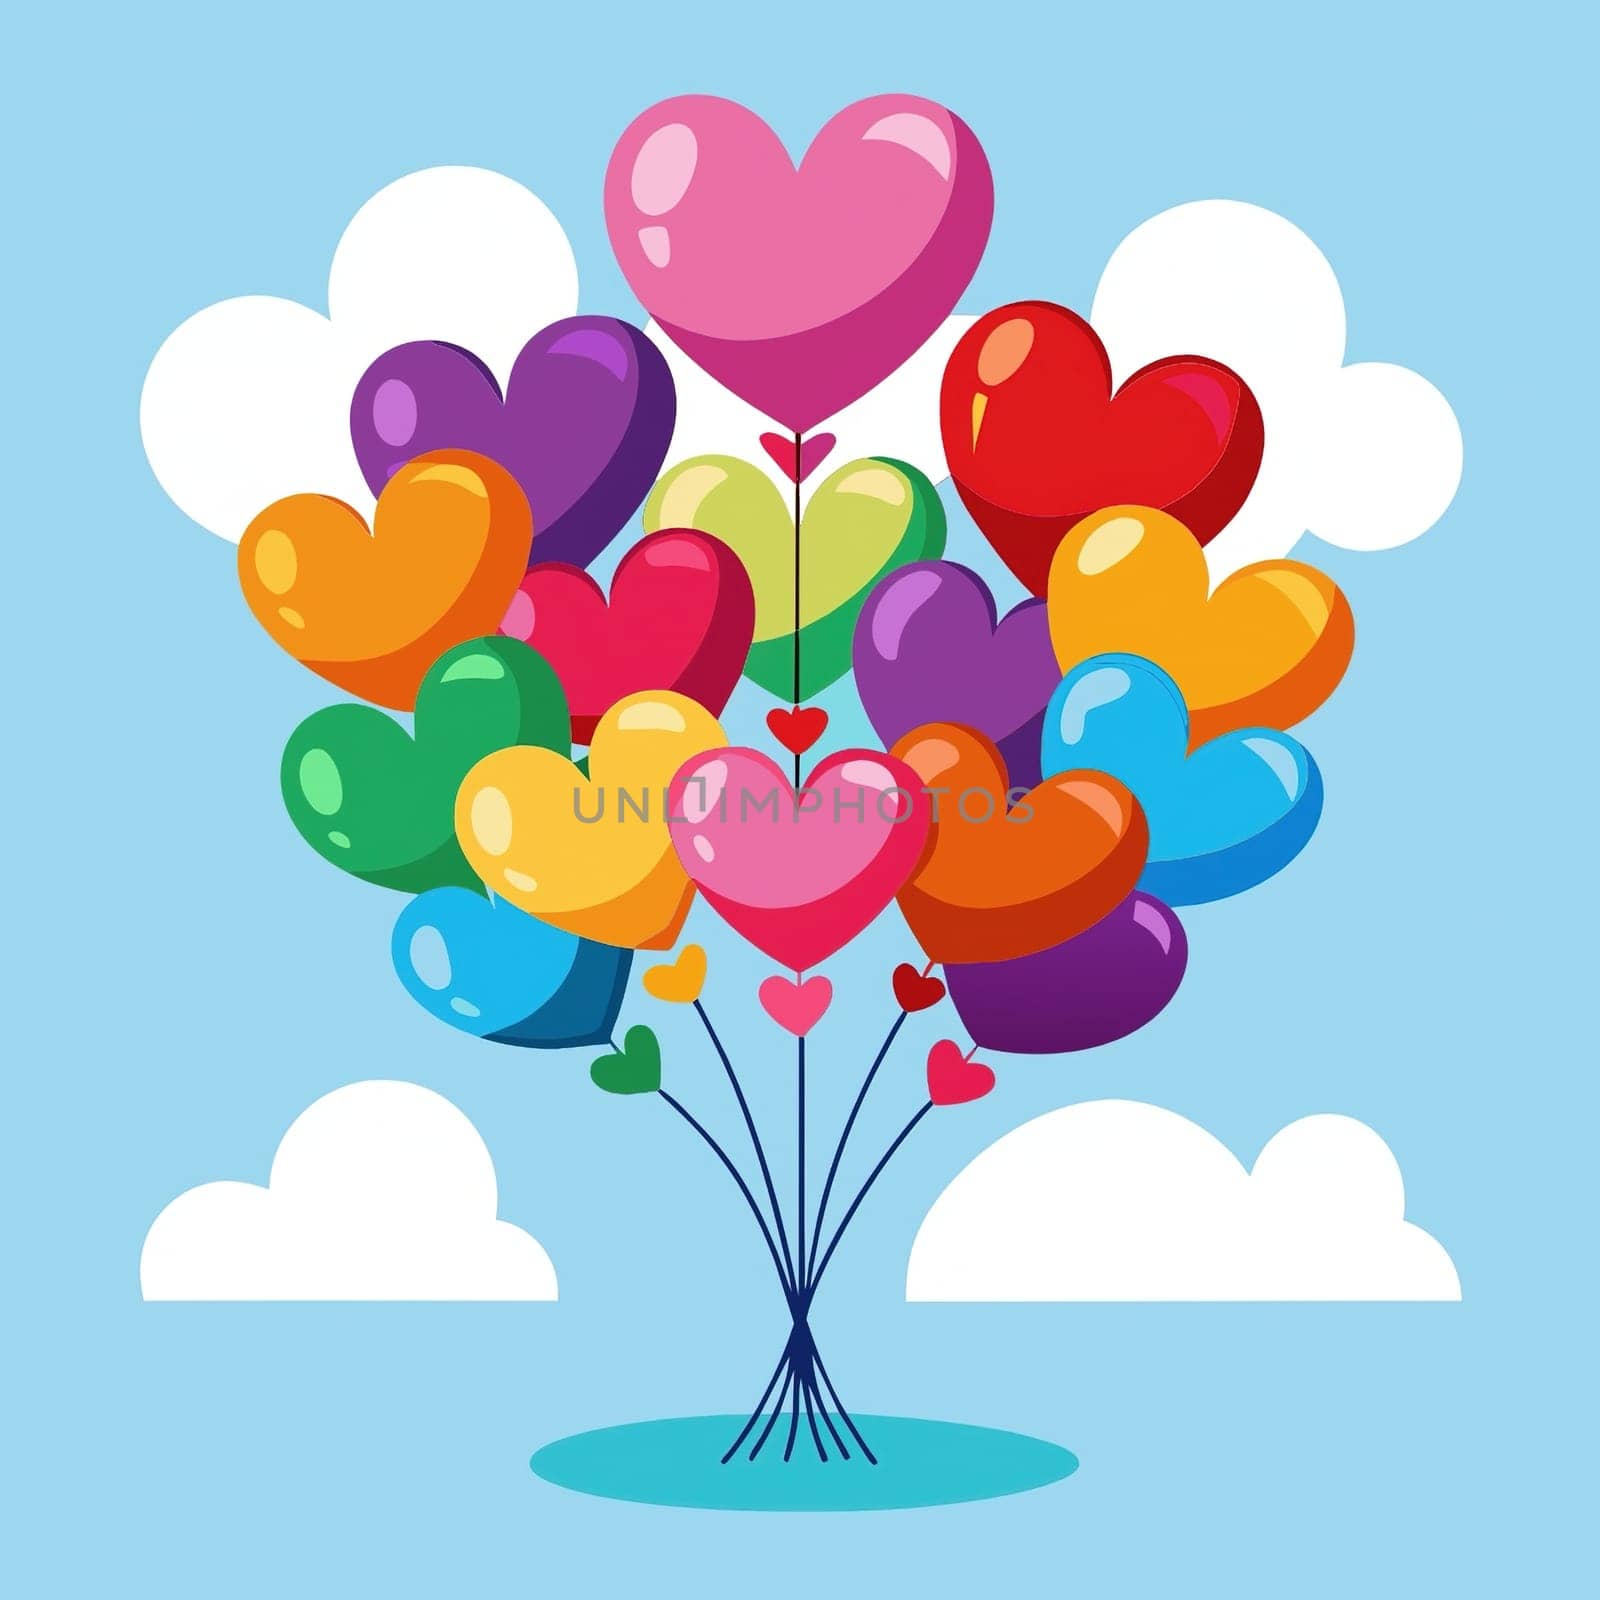 Bouquet of heart balloons on background. Vector illustration.Valentines day background.Balloons in the shape of a heart.Bunch of balloons in the shape of heart.